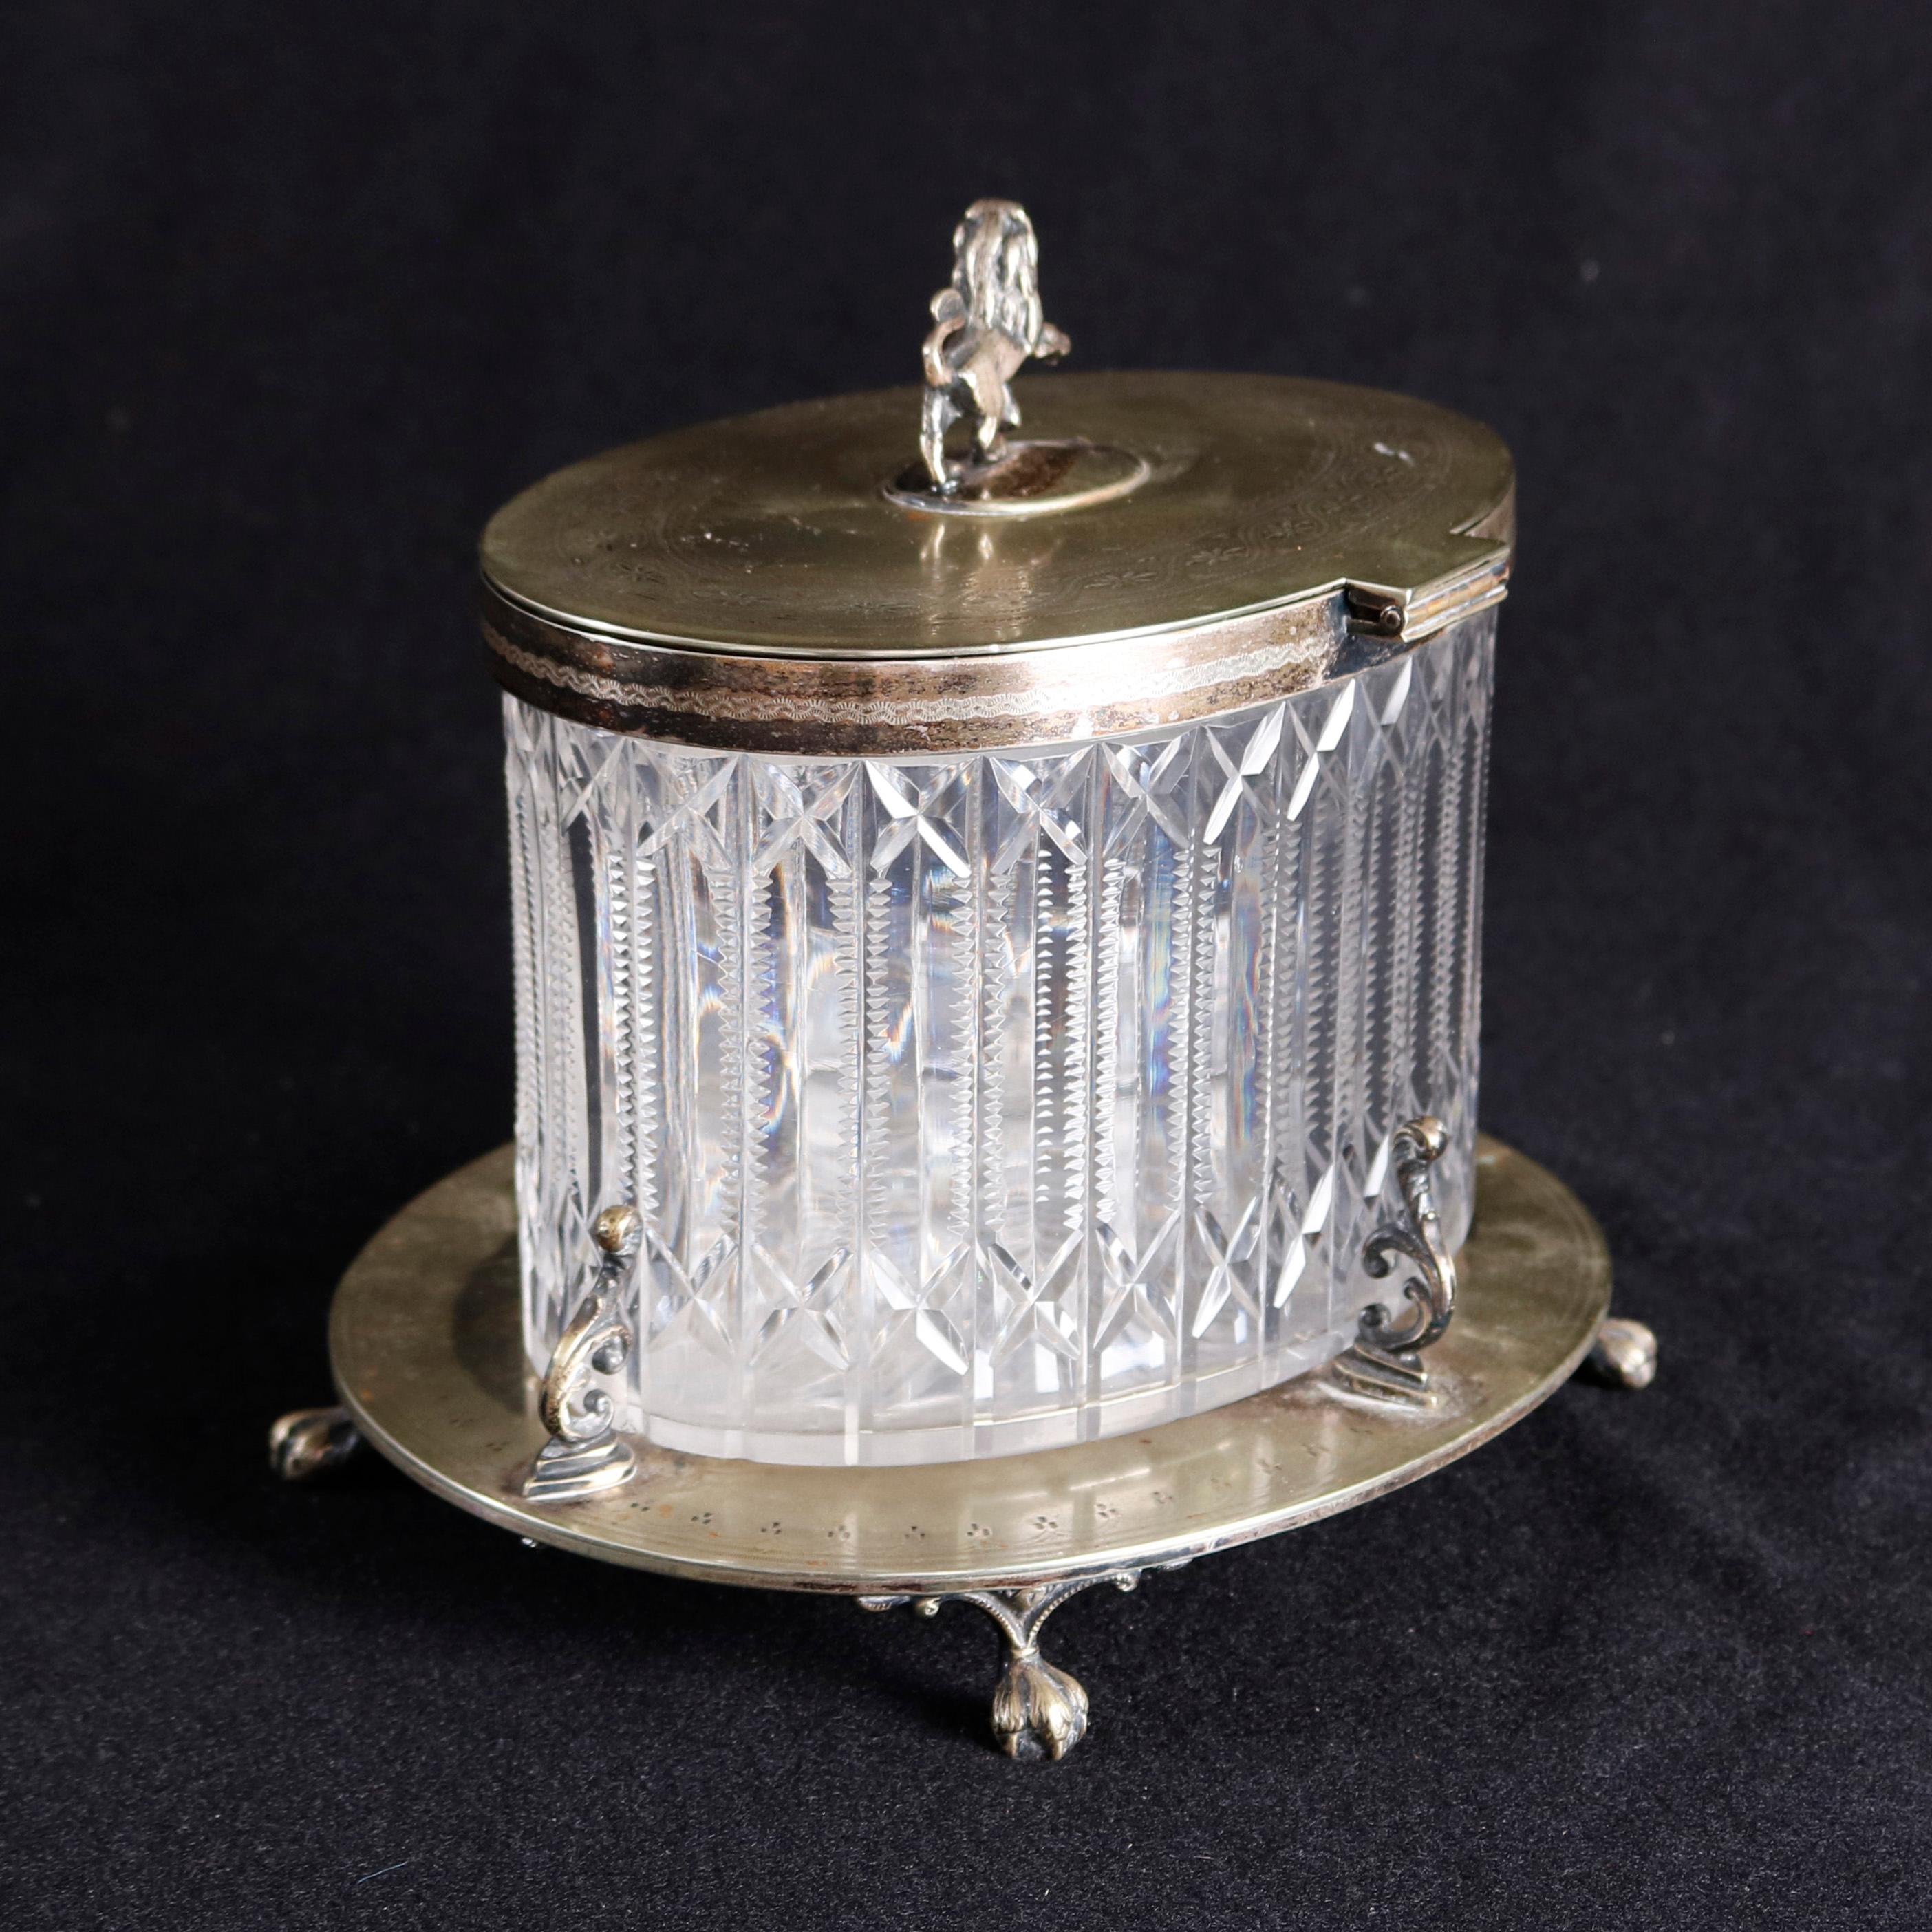 An antique English Regency Mappin and Webb biscuit jar offers cut crystal jar with hinged figural silver plate lid having lion passat finial, seated on decorated silver plate base with scrolled foliate supports and claw and ball feet, circa